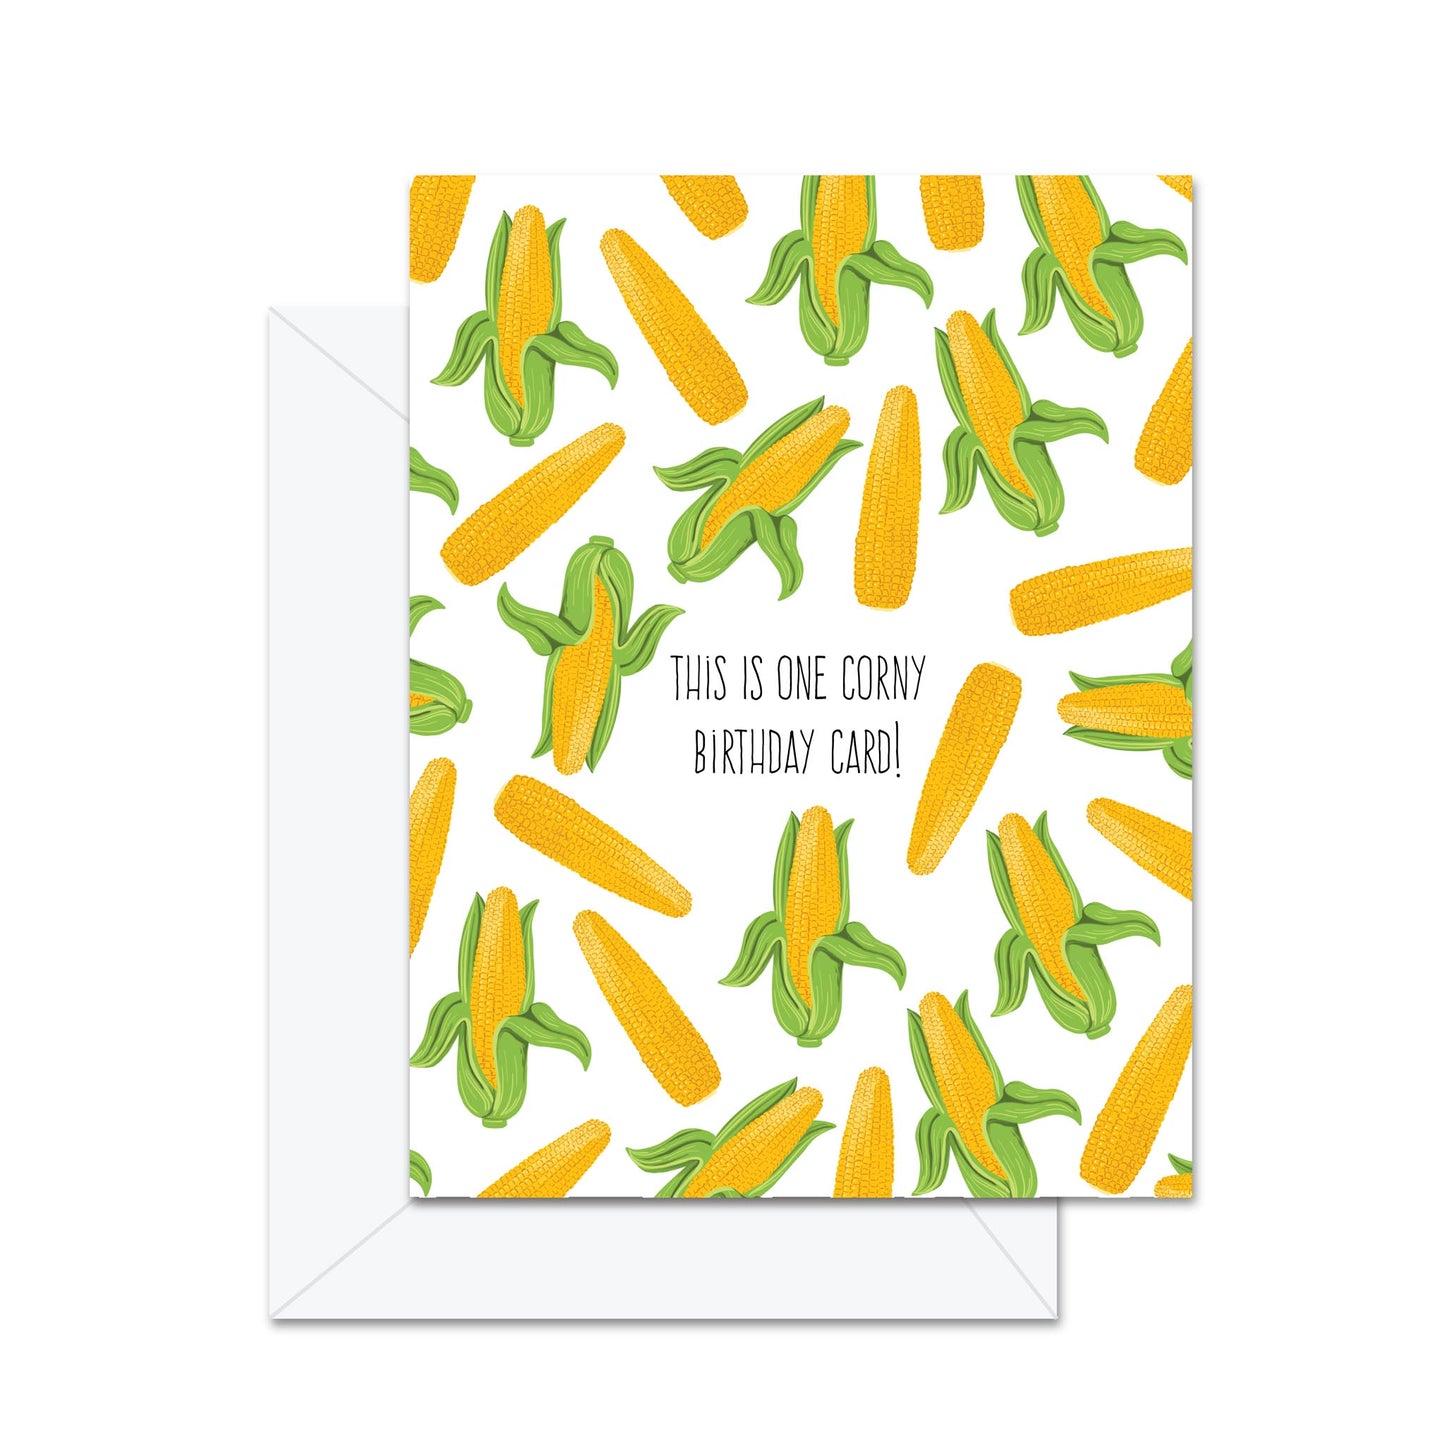 This Is One Corny Birthday Card! - Greeting Card